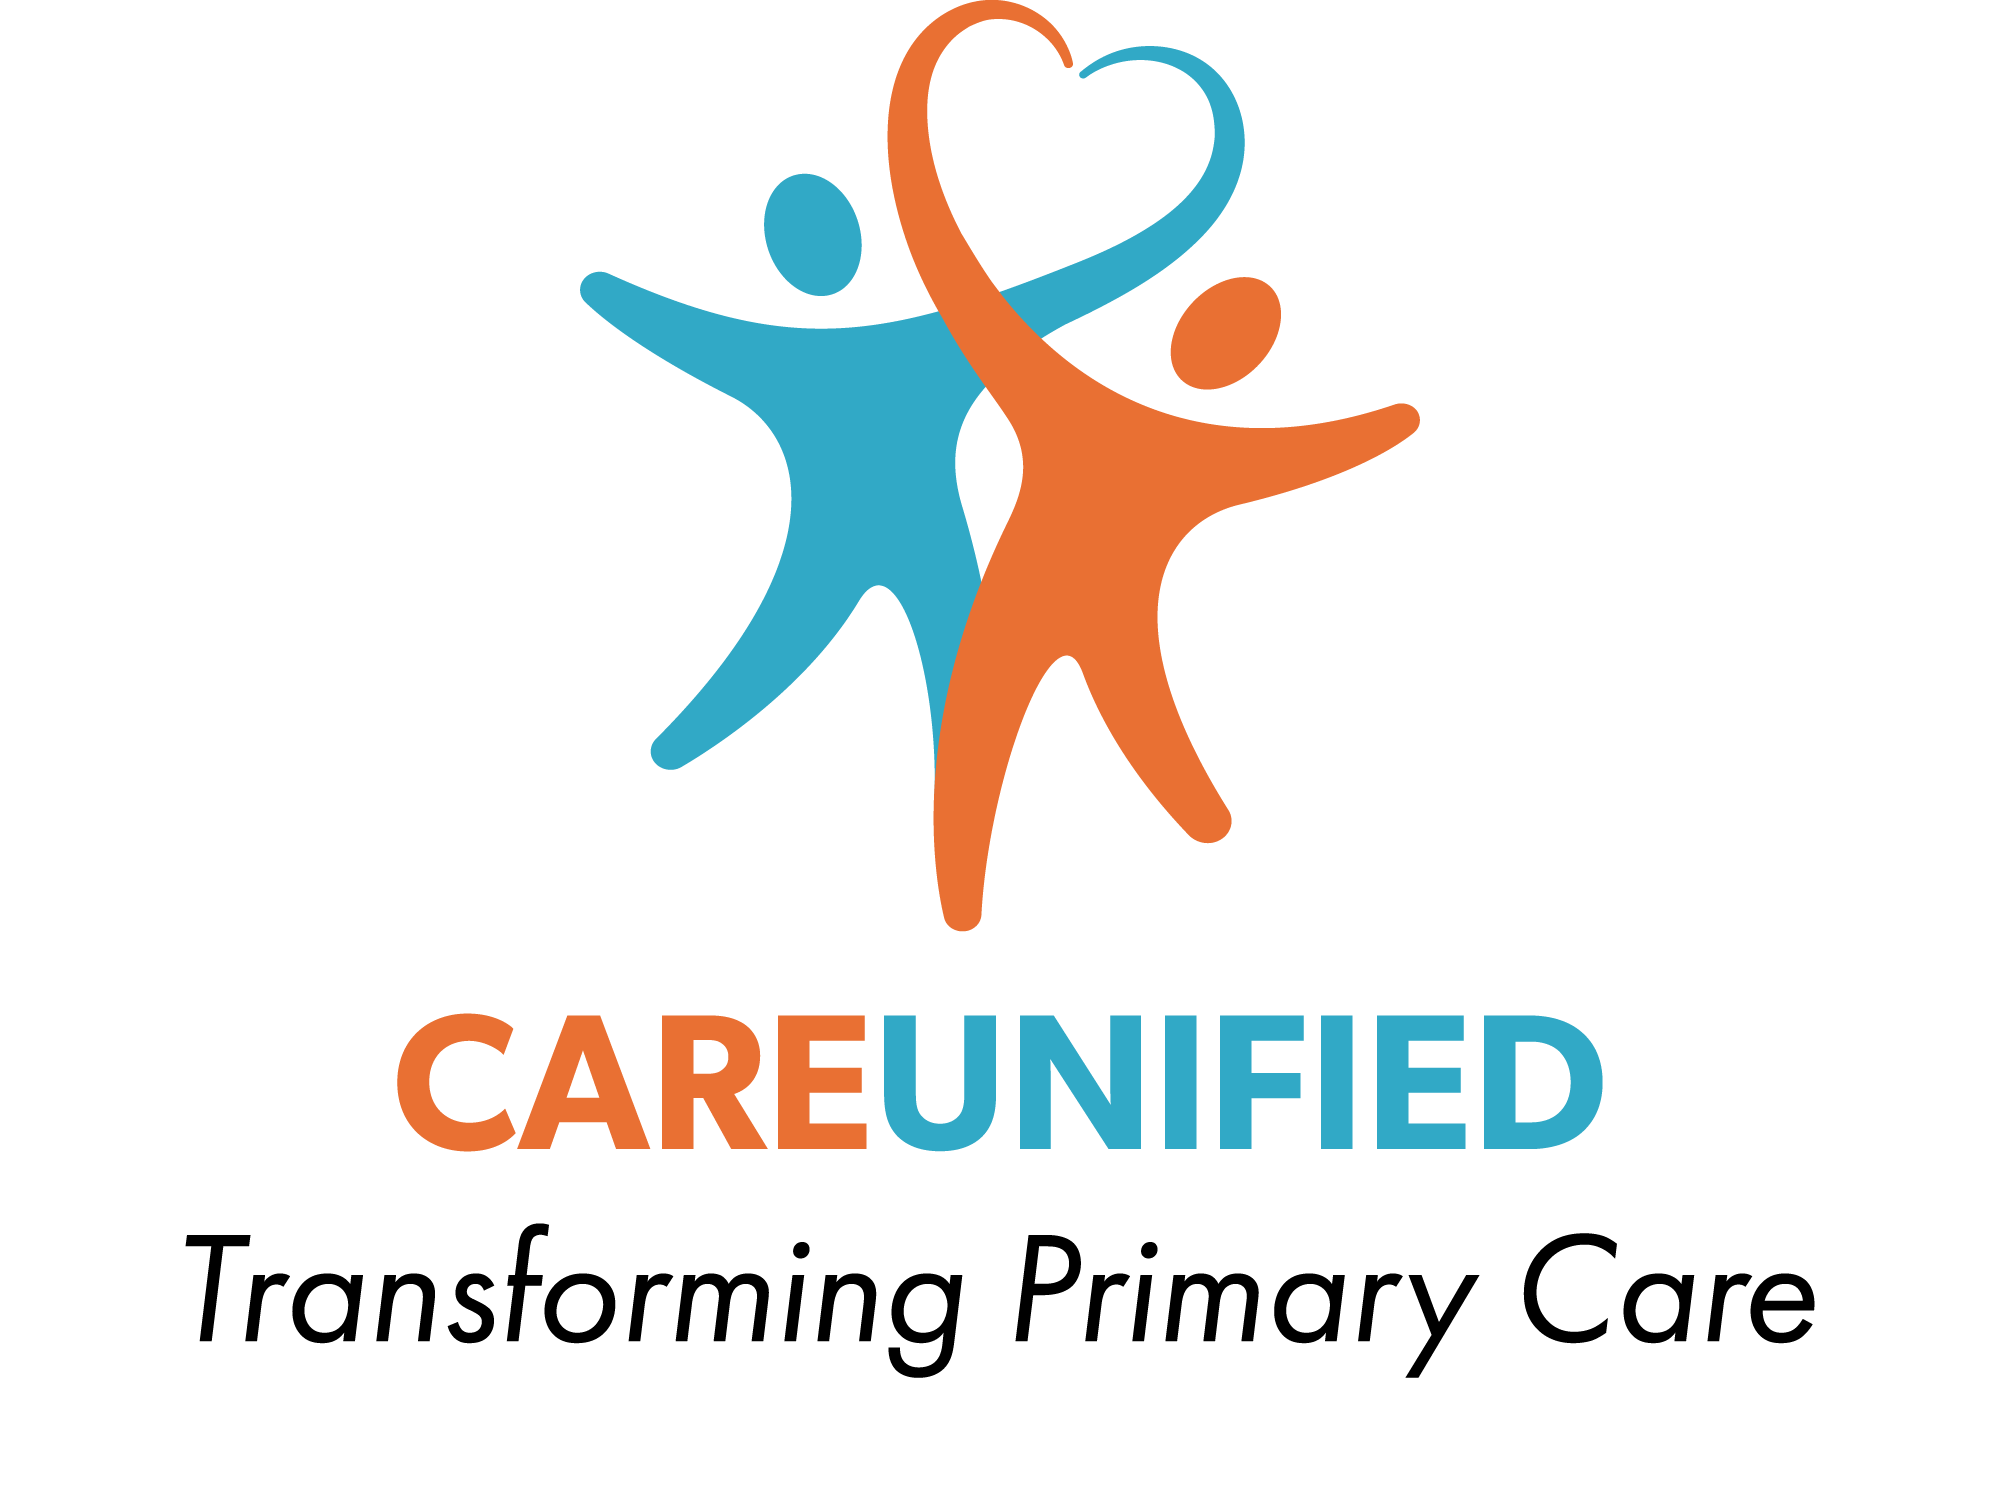 Care Unified